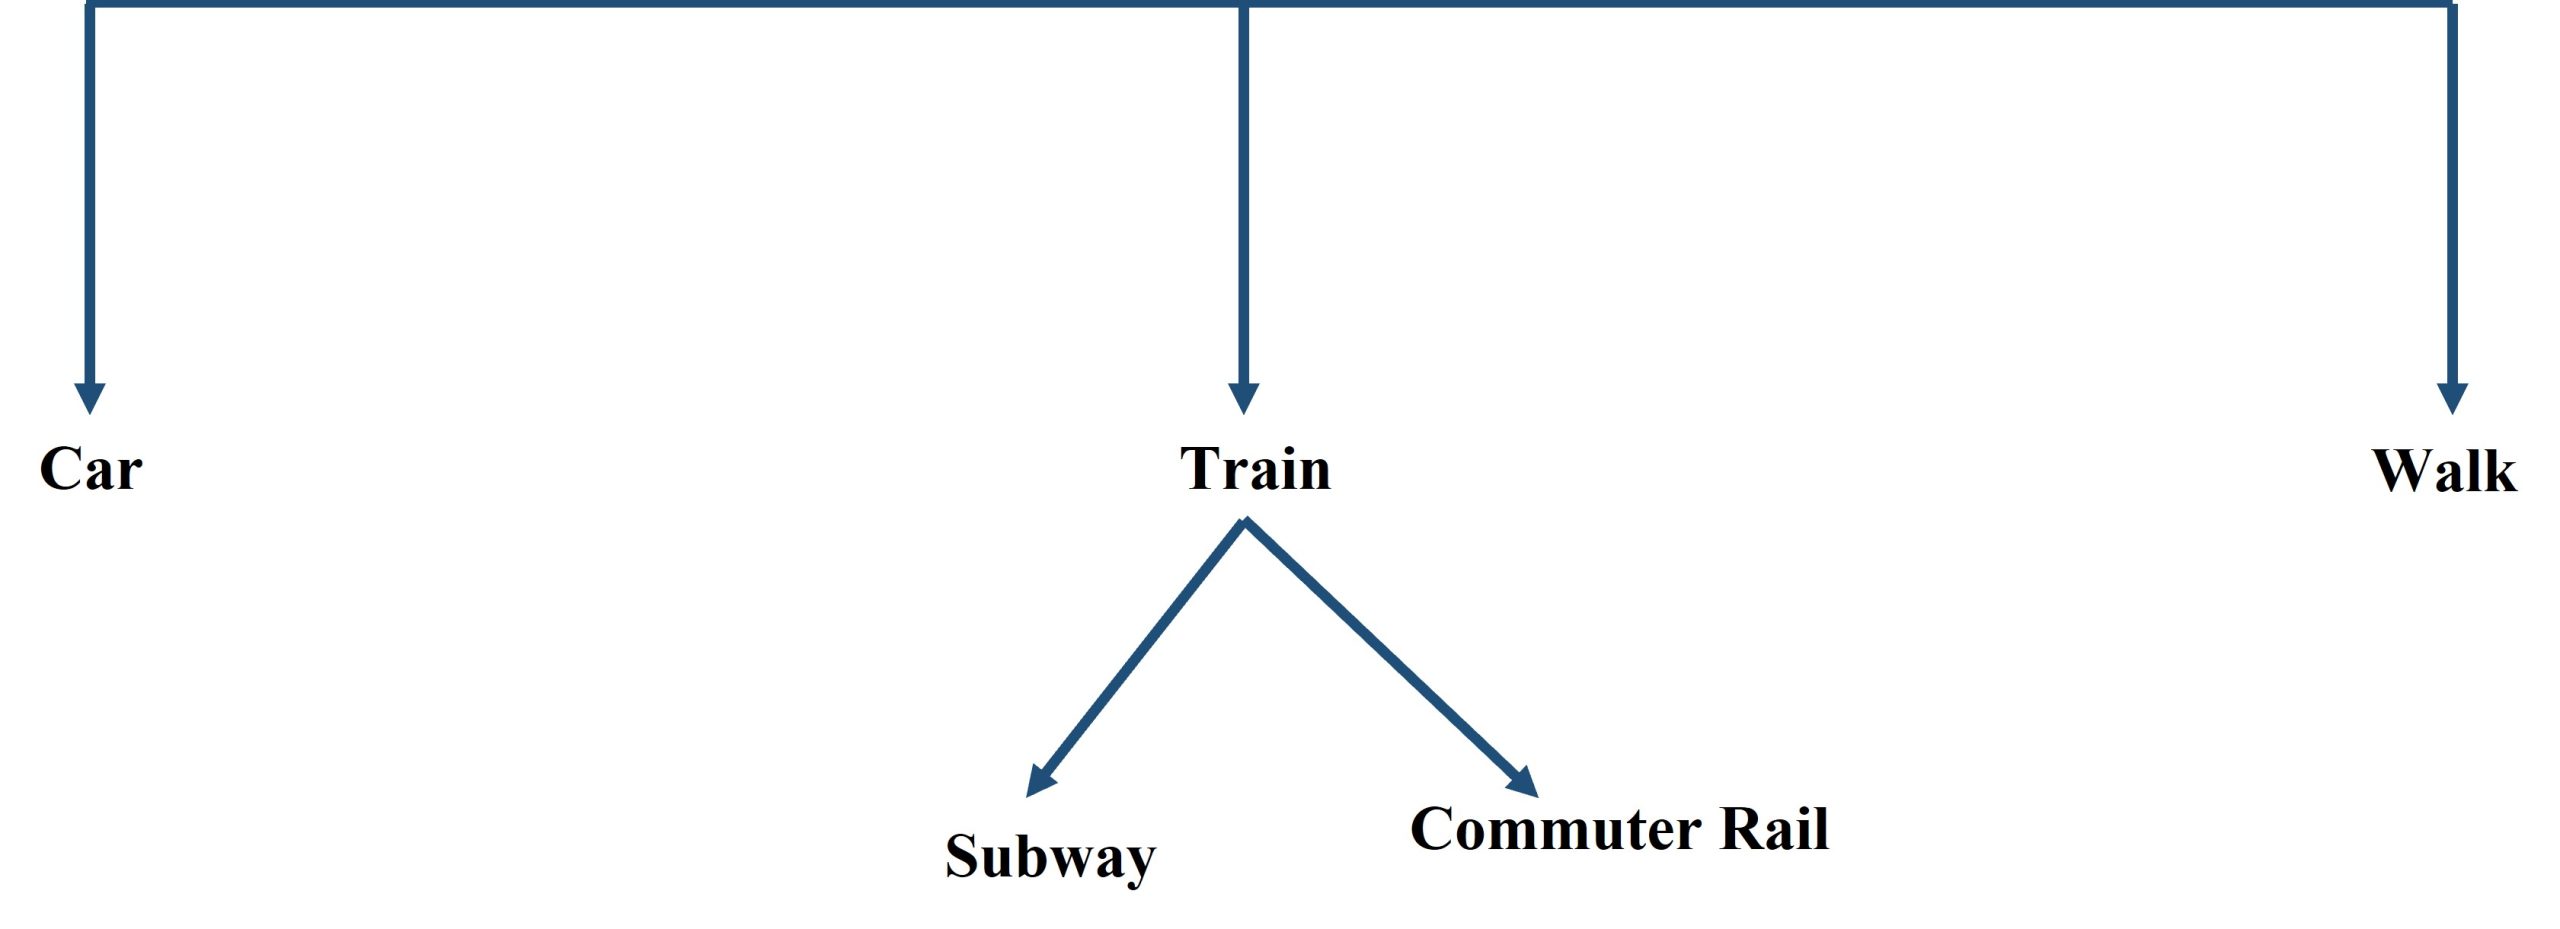 a simple decision tree for transportation mode choice between car, train, and walking.